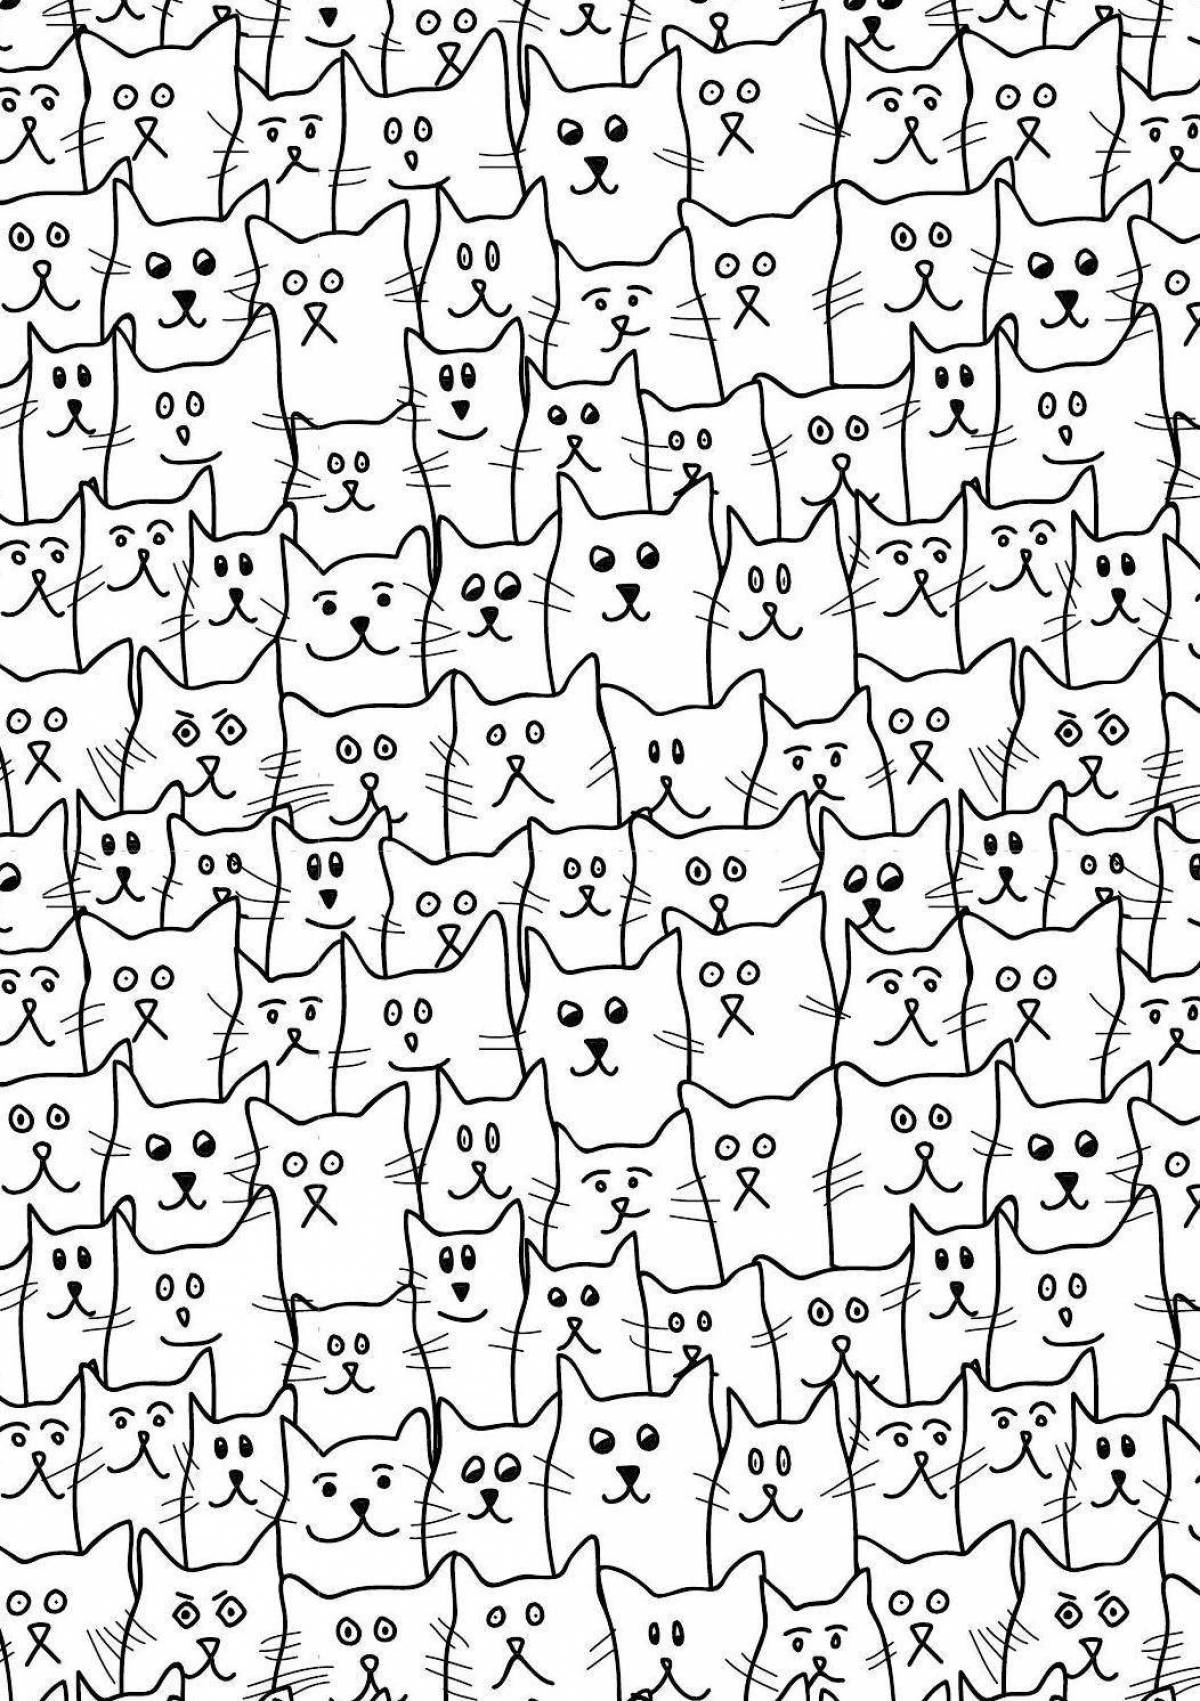 Snuggly-fuzzy kittens coloring page